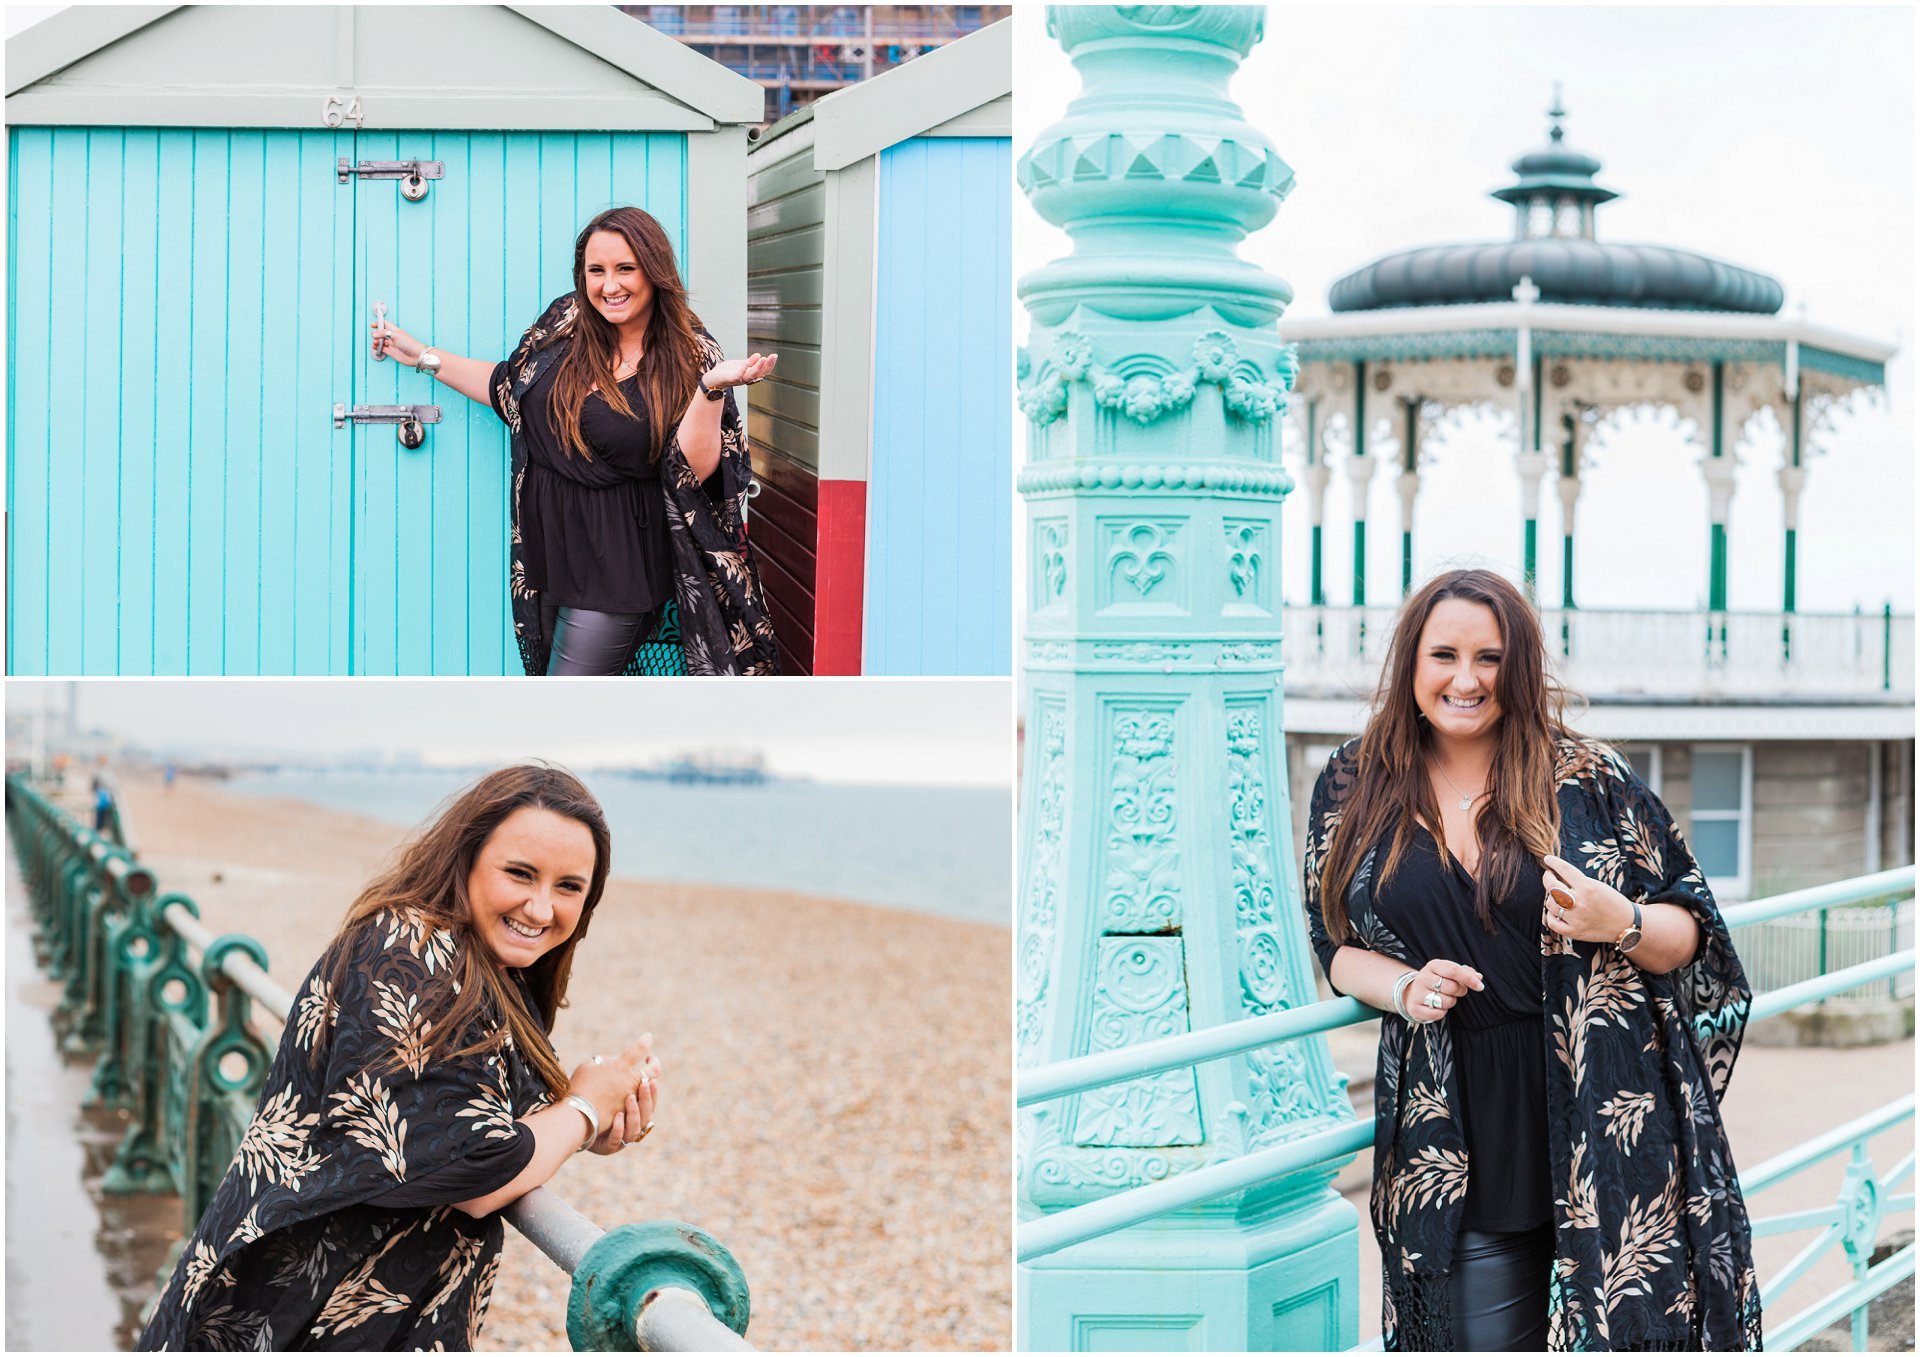 Brighton brand shoot with brand designer Nicki James from Just Brand You. Images by London brand photographer AKP Branding Stories